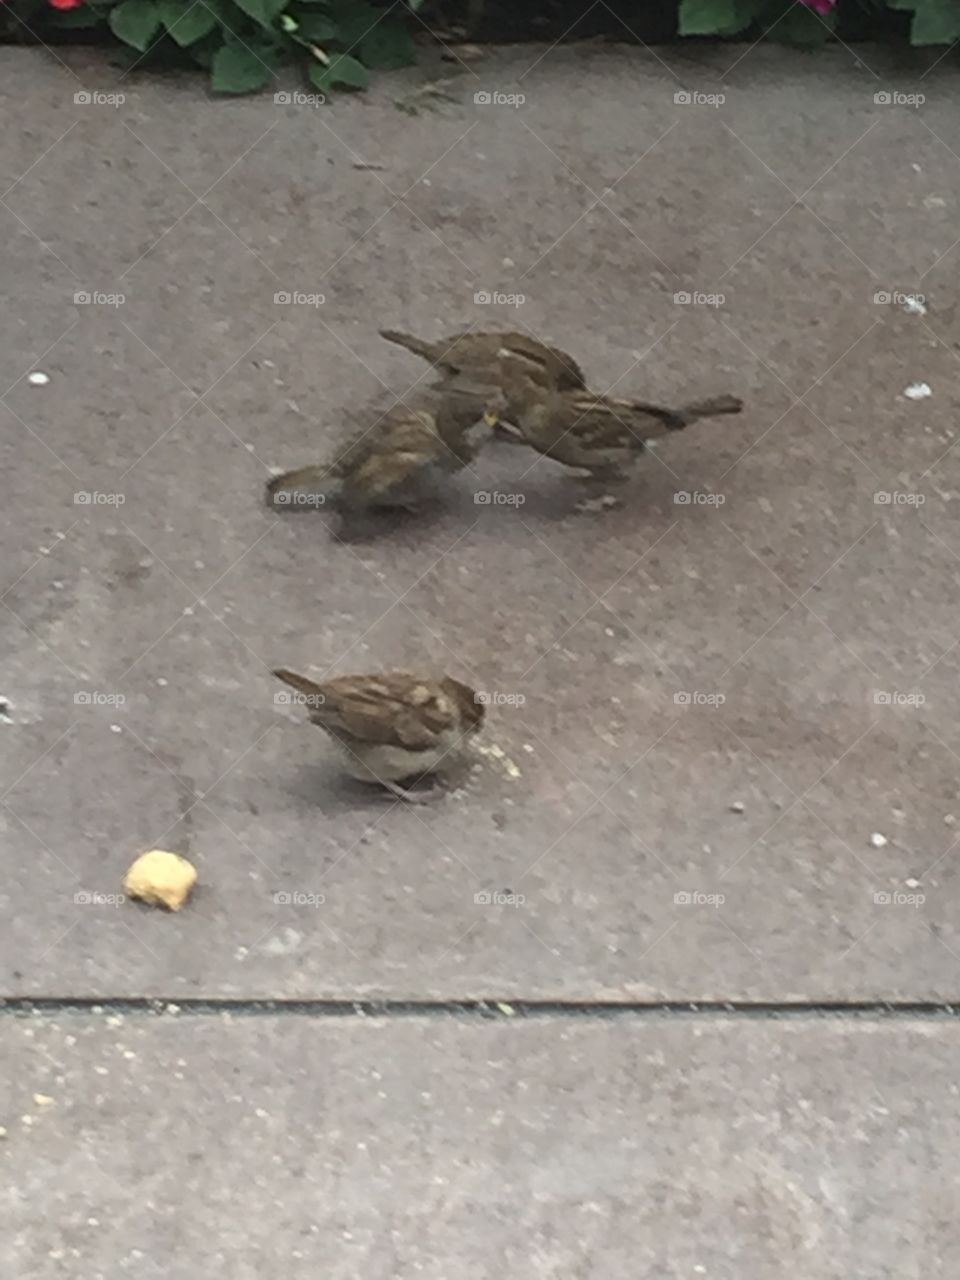 NYC LUNCH FOR THE BIRDS